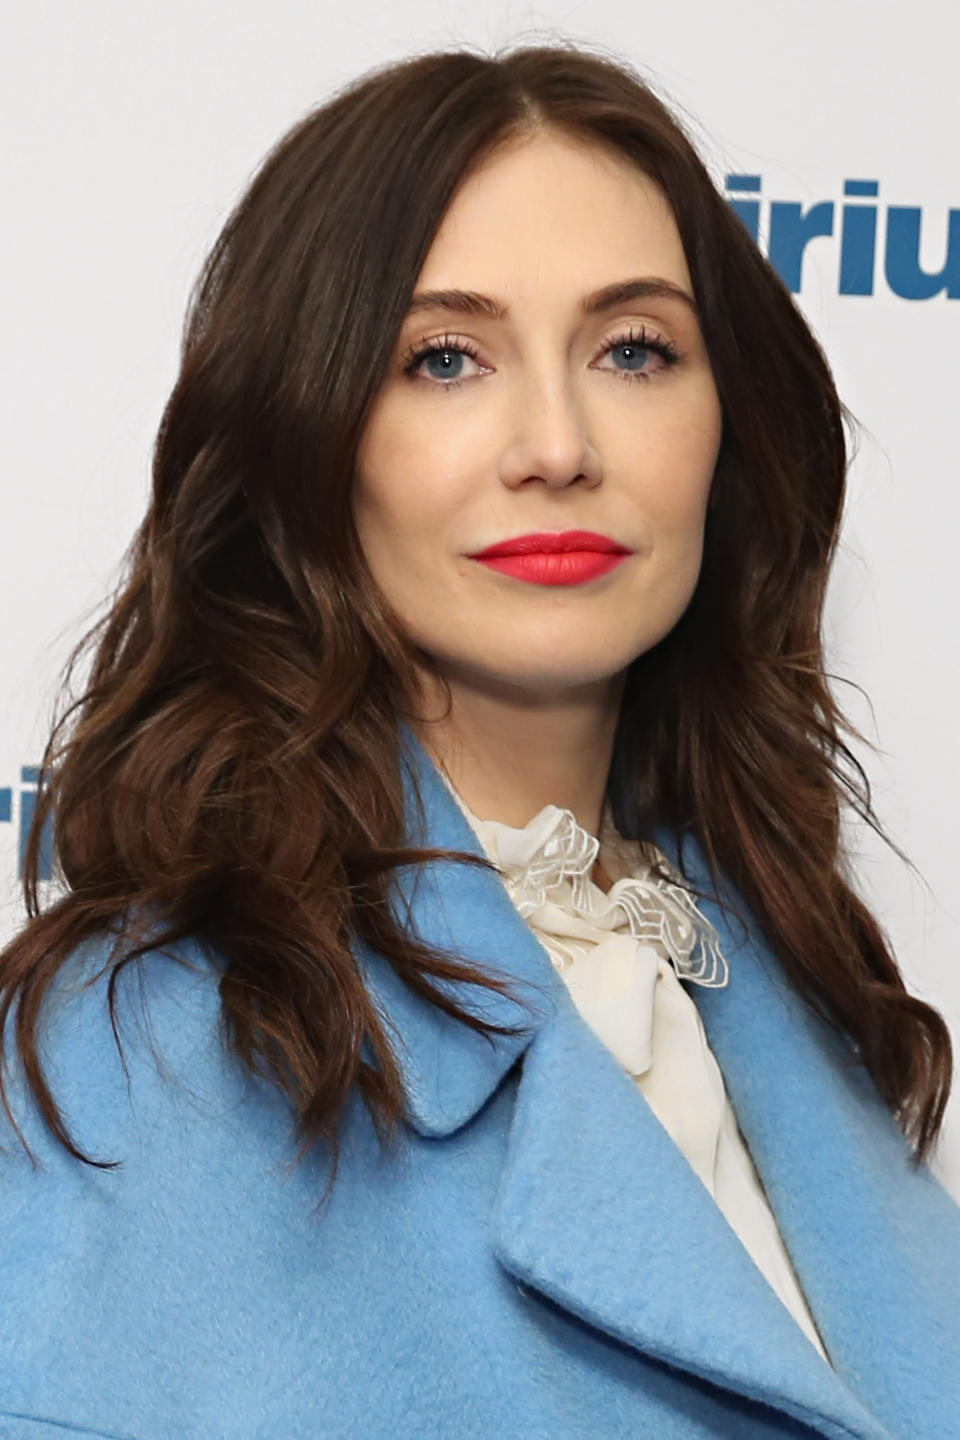 &amp;lsquo;Game Of Thrones&amp;rsquo; actress&amp;nbsp;Carice van Houten announced in March 2016 that she and actor Guy Pearce were expecting their&amp;nbsp;first child.